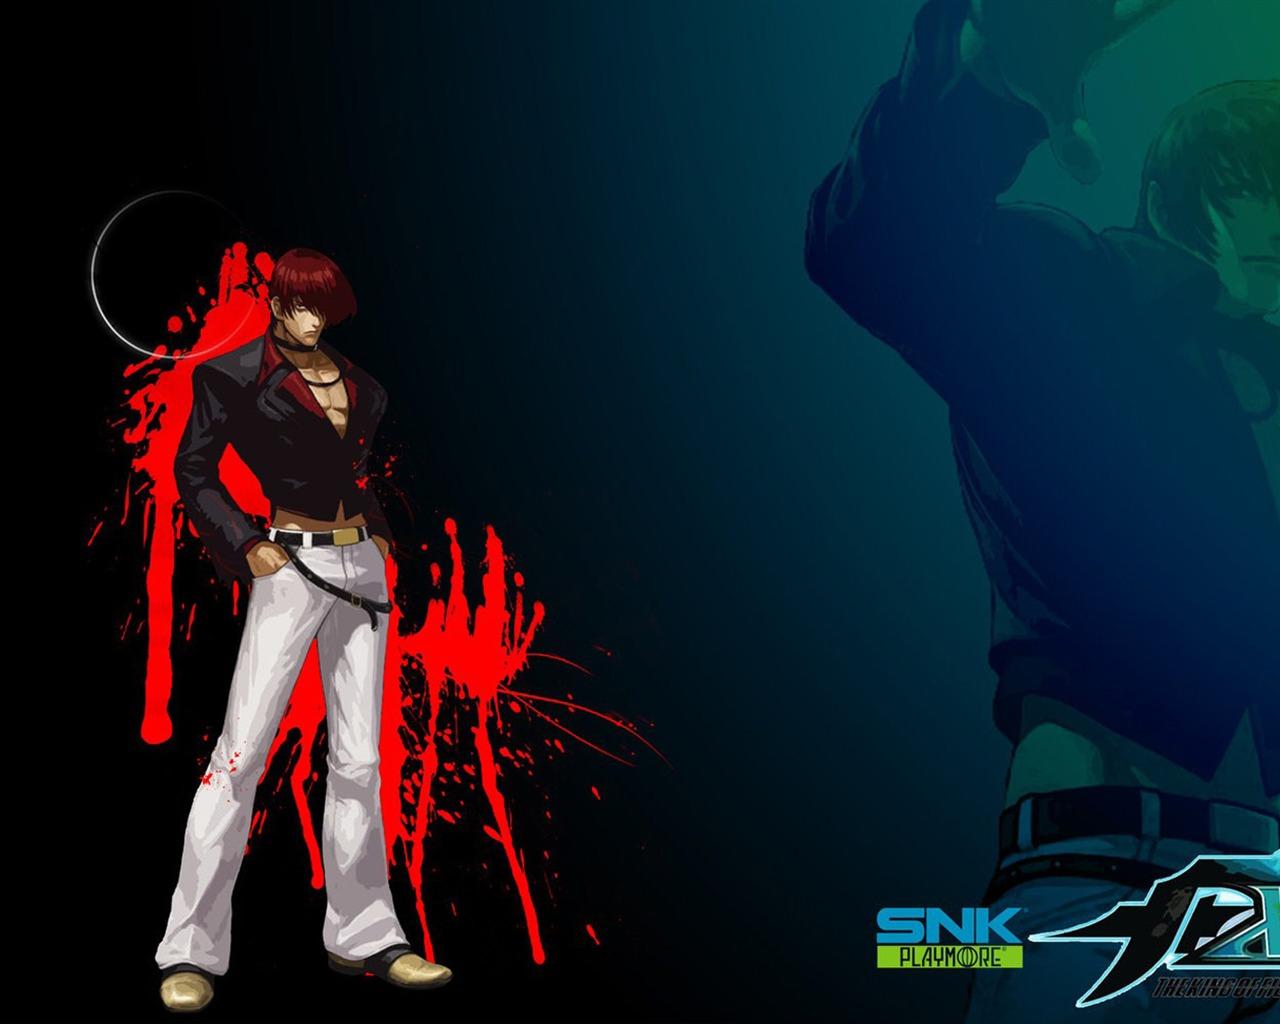 The King of Fighters XIII wallpaper